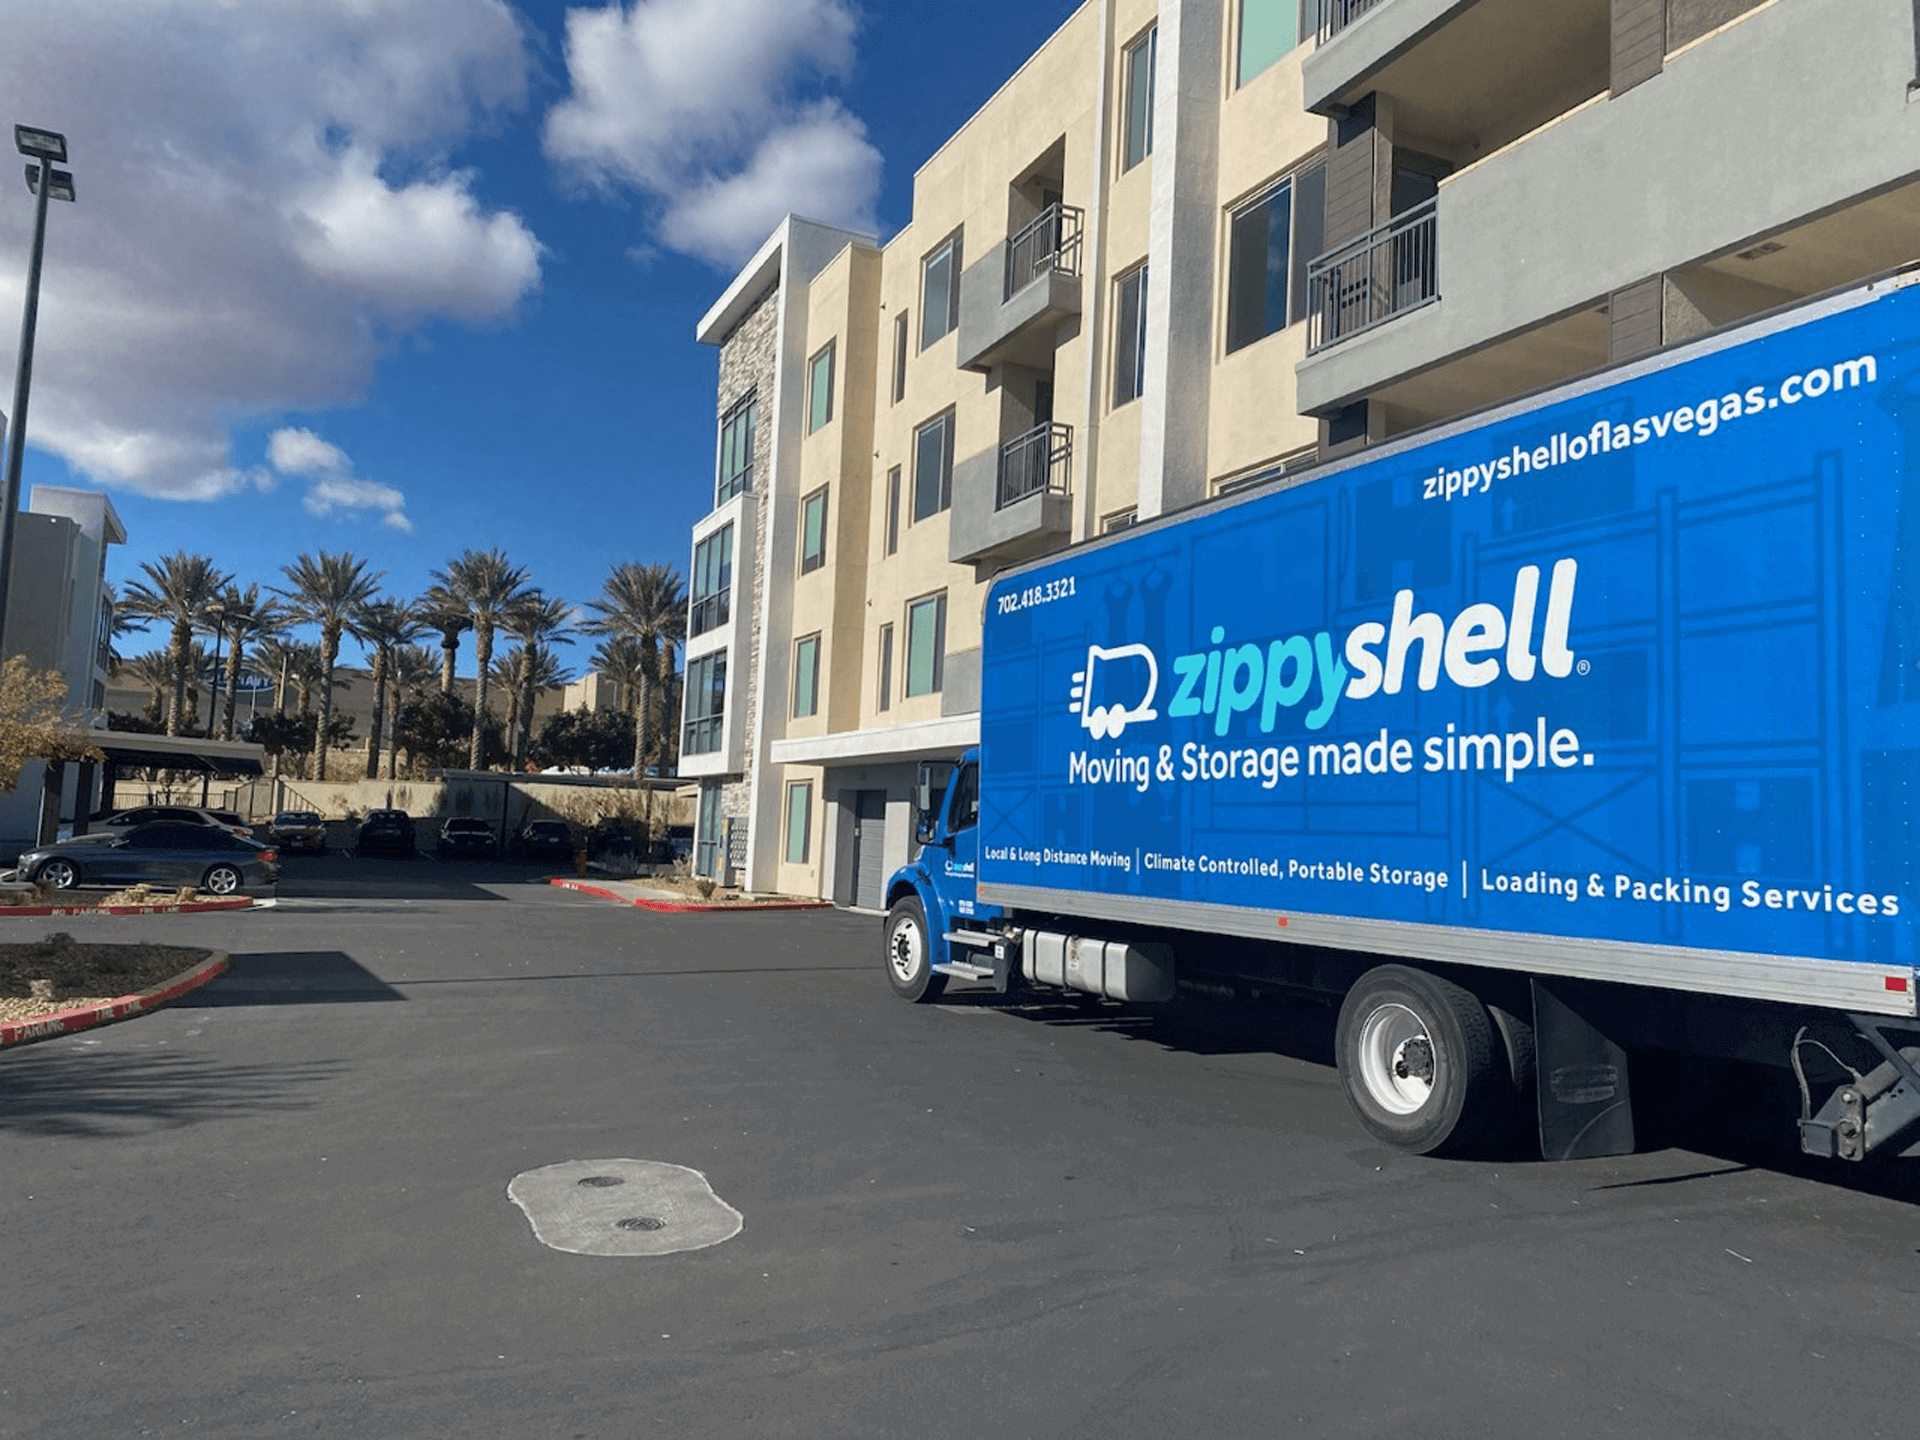 zippy shell truck parked outside apartment homes